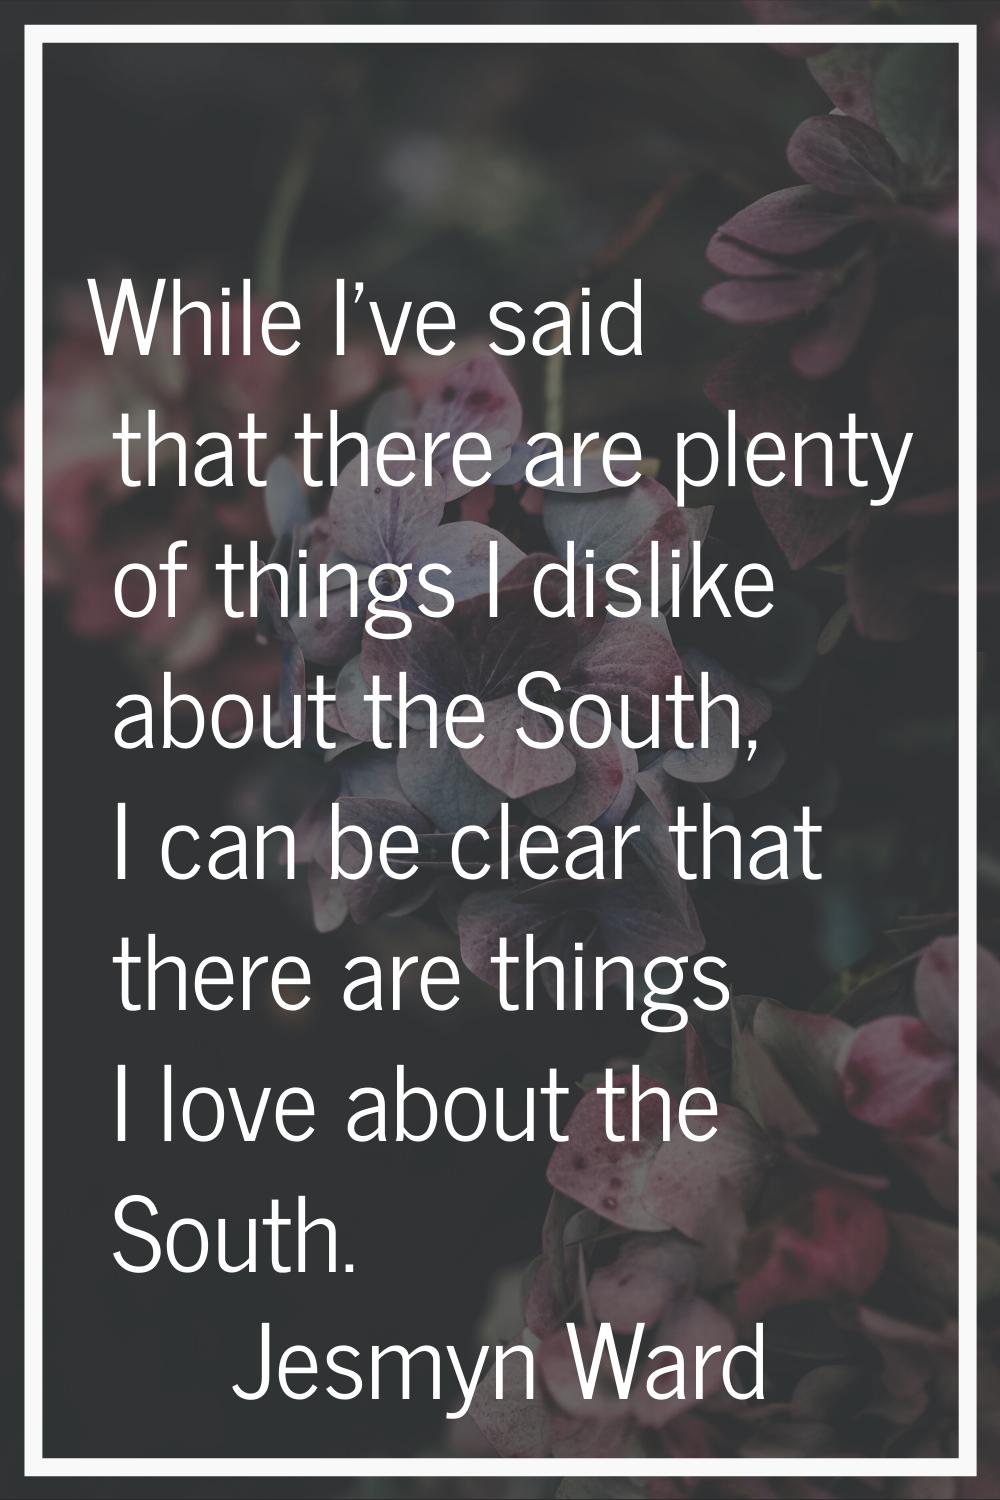 While I've said that there are plenty of things I dislike about the South, I can be clear that ther